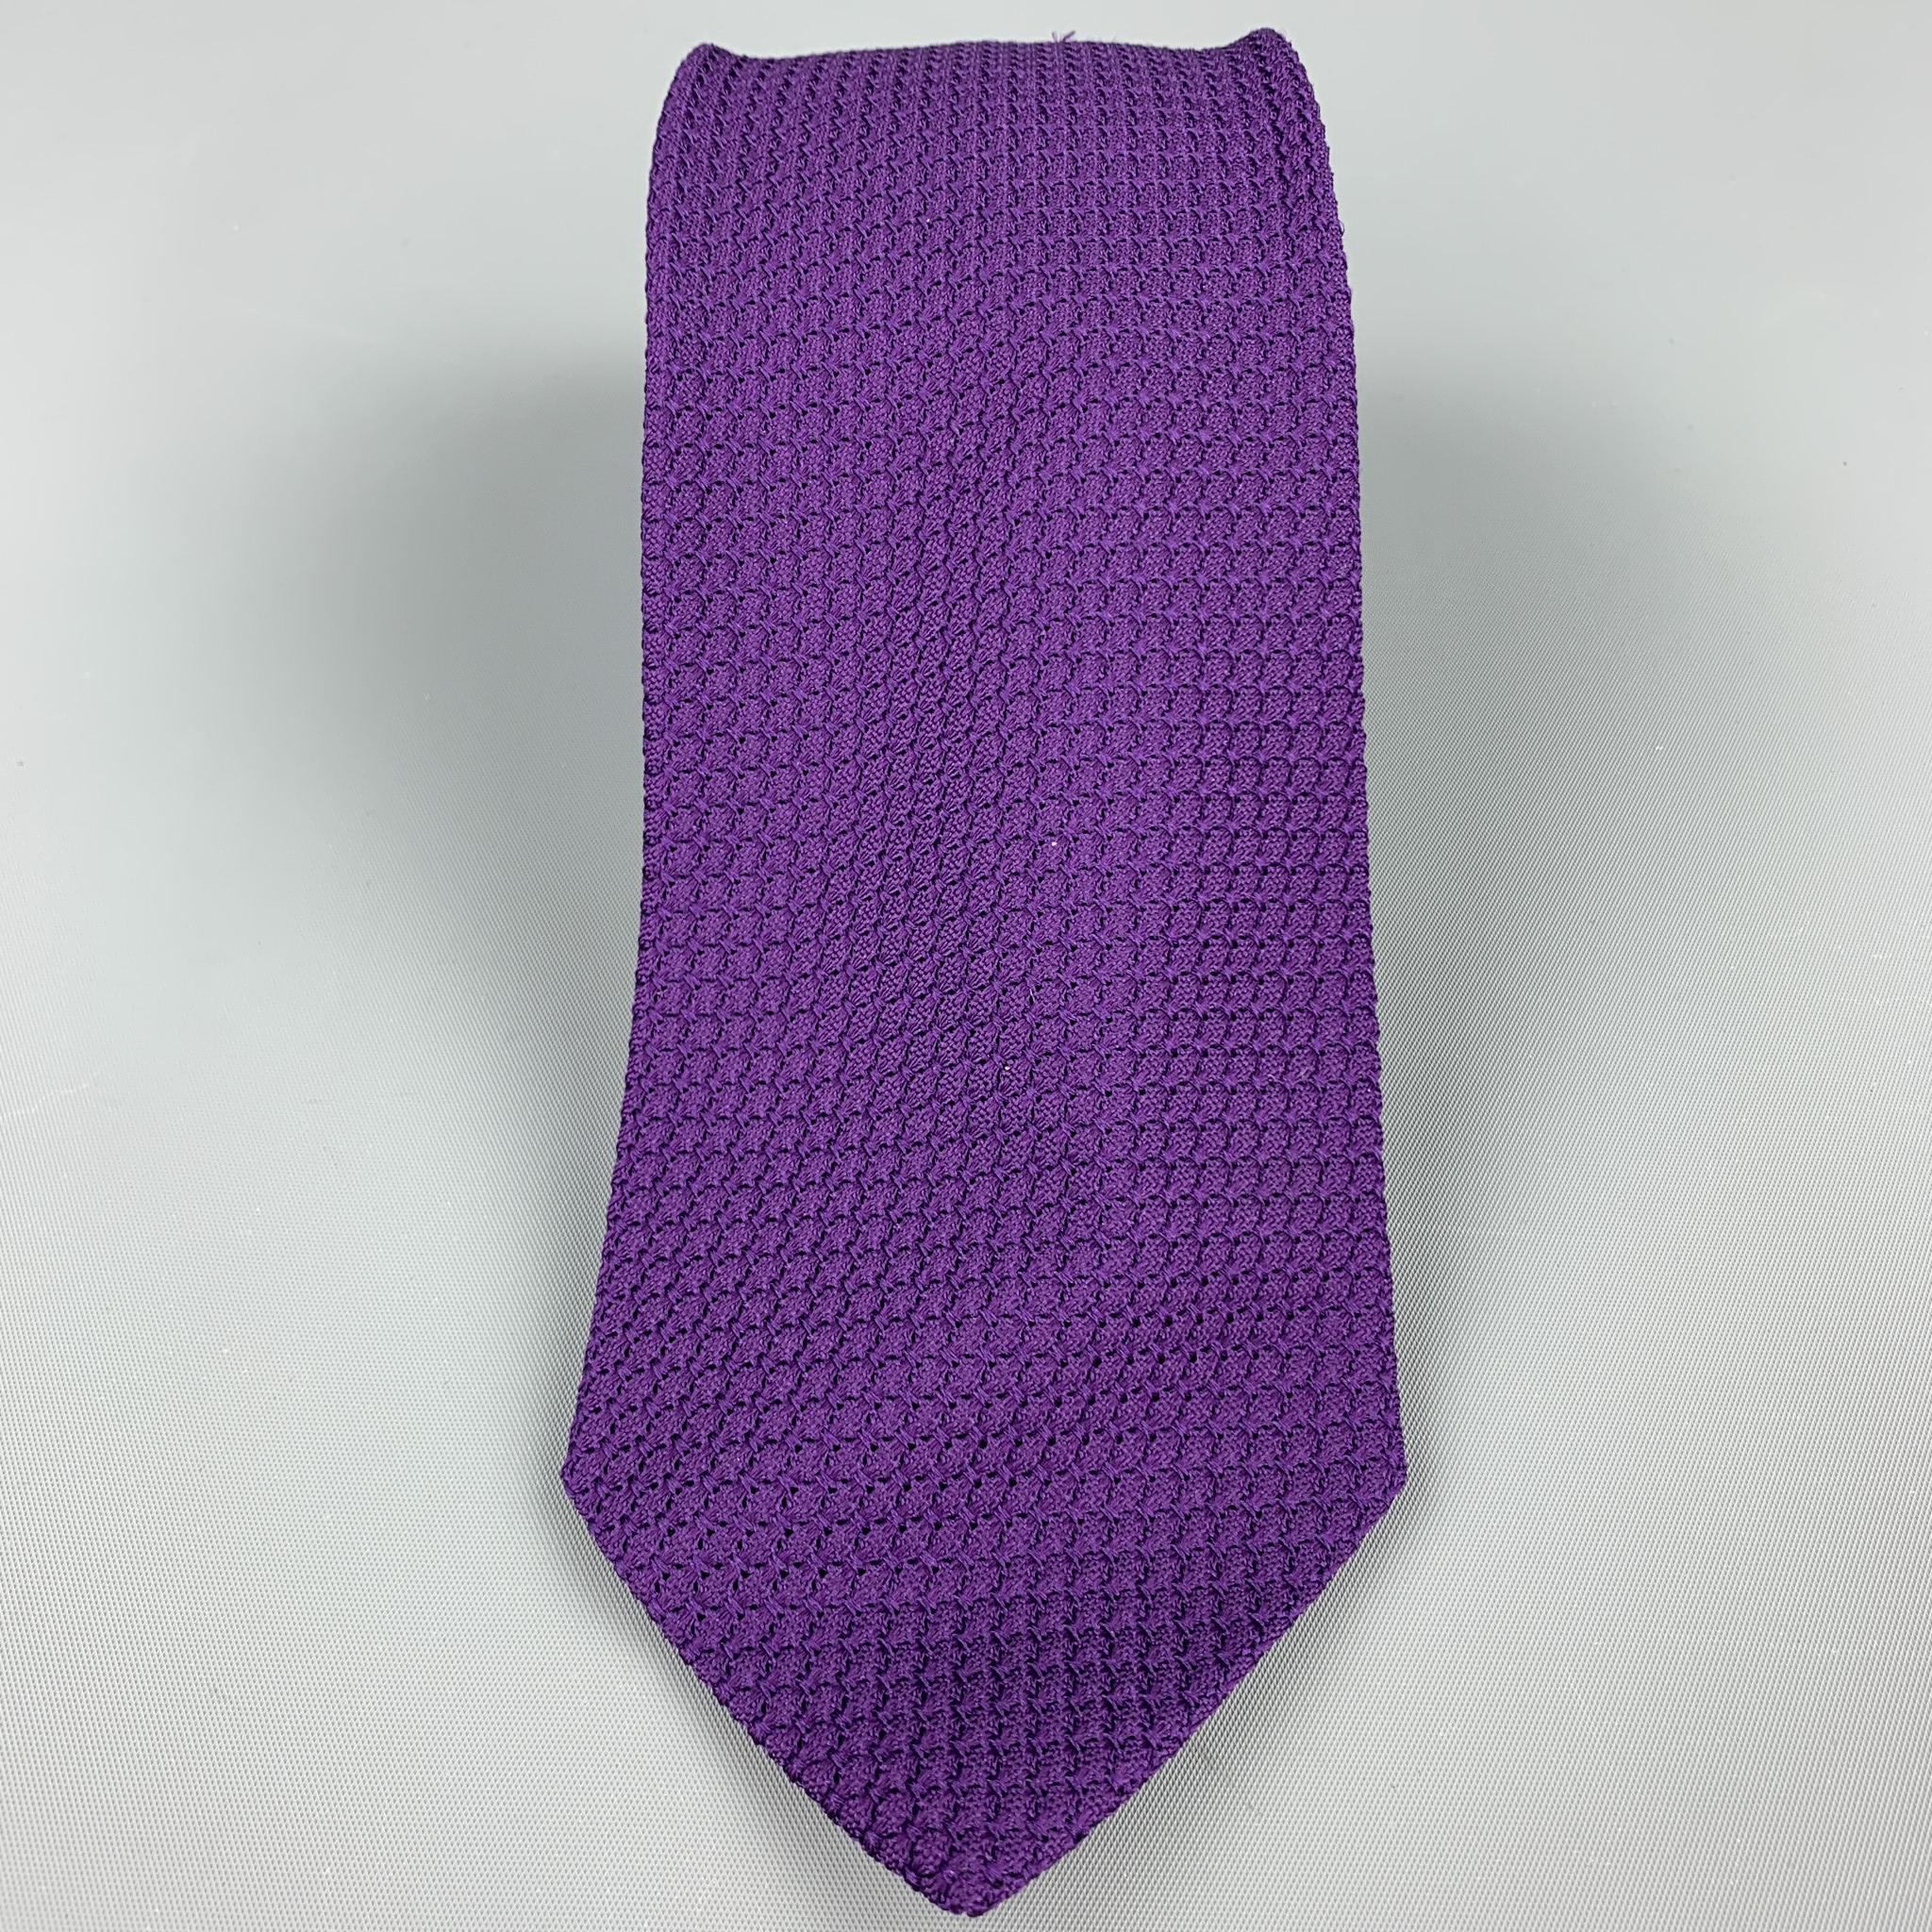 DRAKES LONDON necktie comes in a purple knitted silk. Hand made in England.

Very Good Pre-Owned Condition.

Width: 3 in. 

SKU: 103747
Category: Tie

More Details
Brand: DRAKES LONDON
Pattern: Woven
Color: Purple
Fabric: Silk
Age Group: